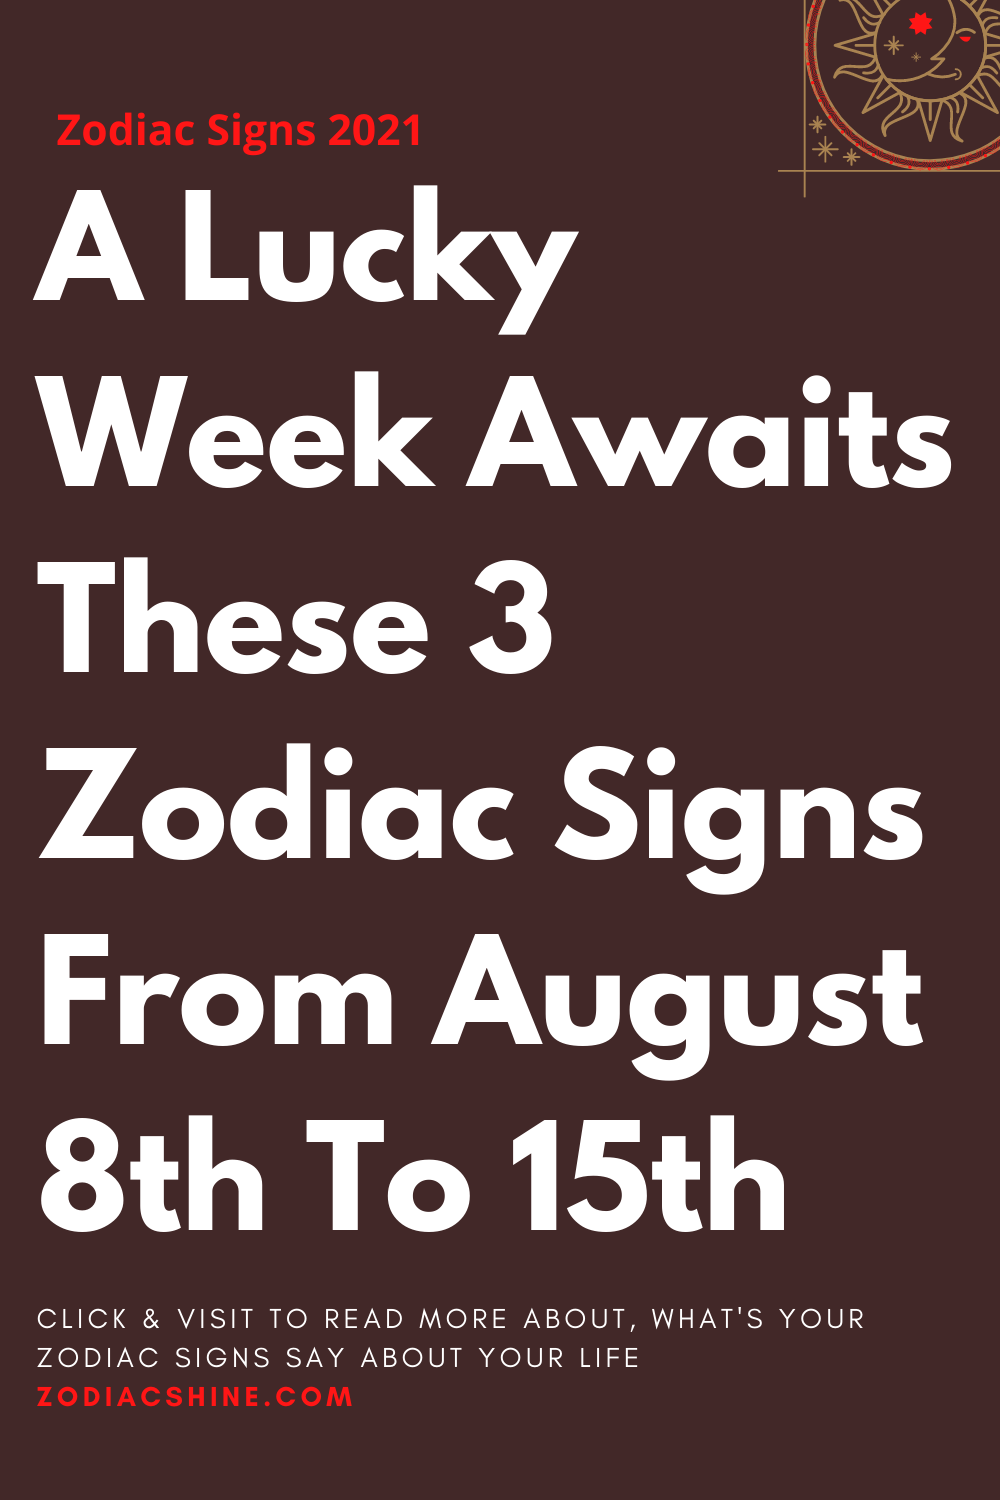 A Lucky Week Awaits These 3 Zodiac Signs From August 8th To 15th